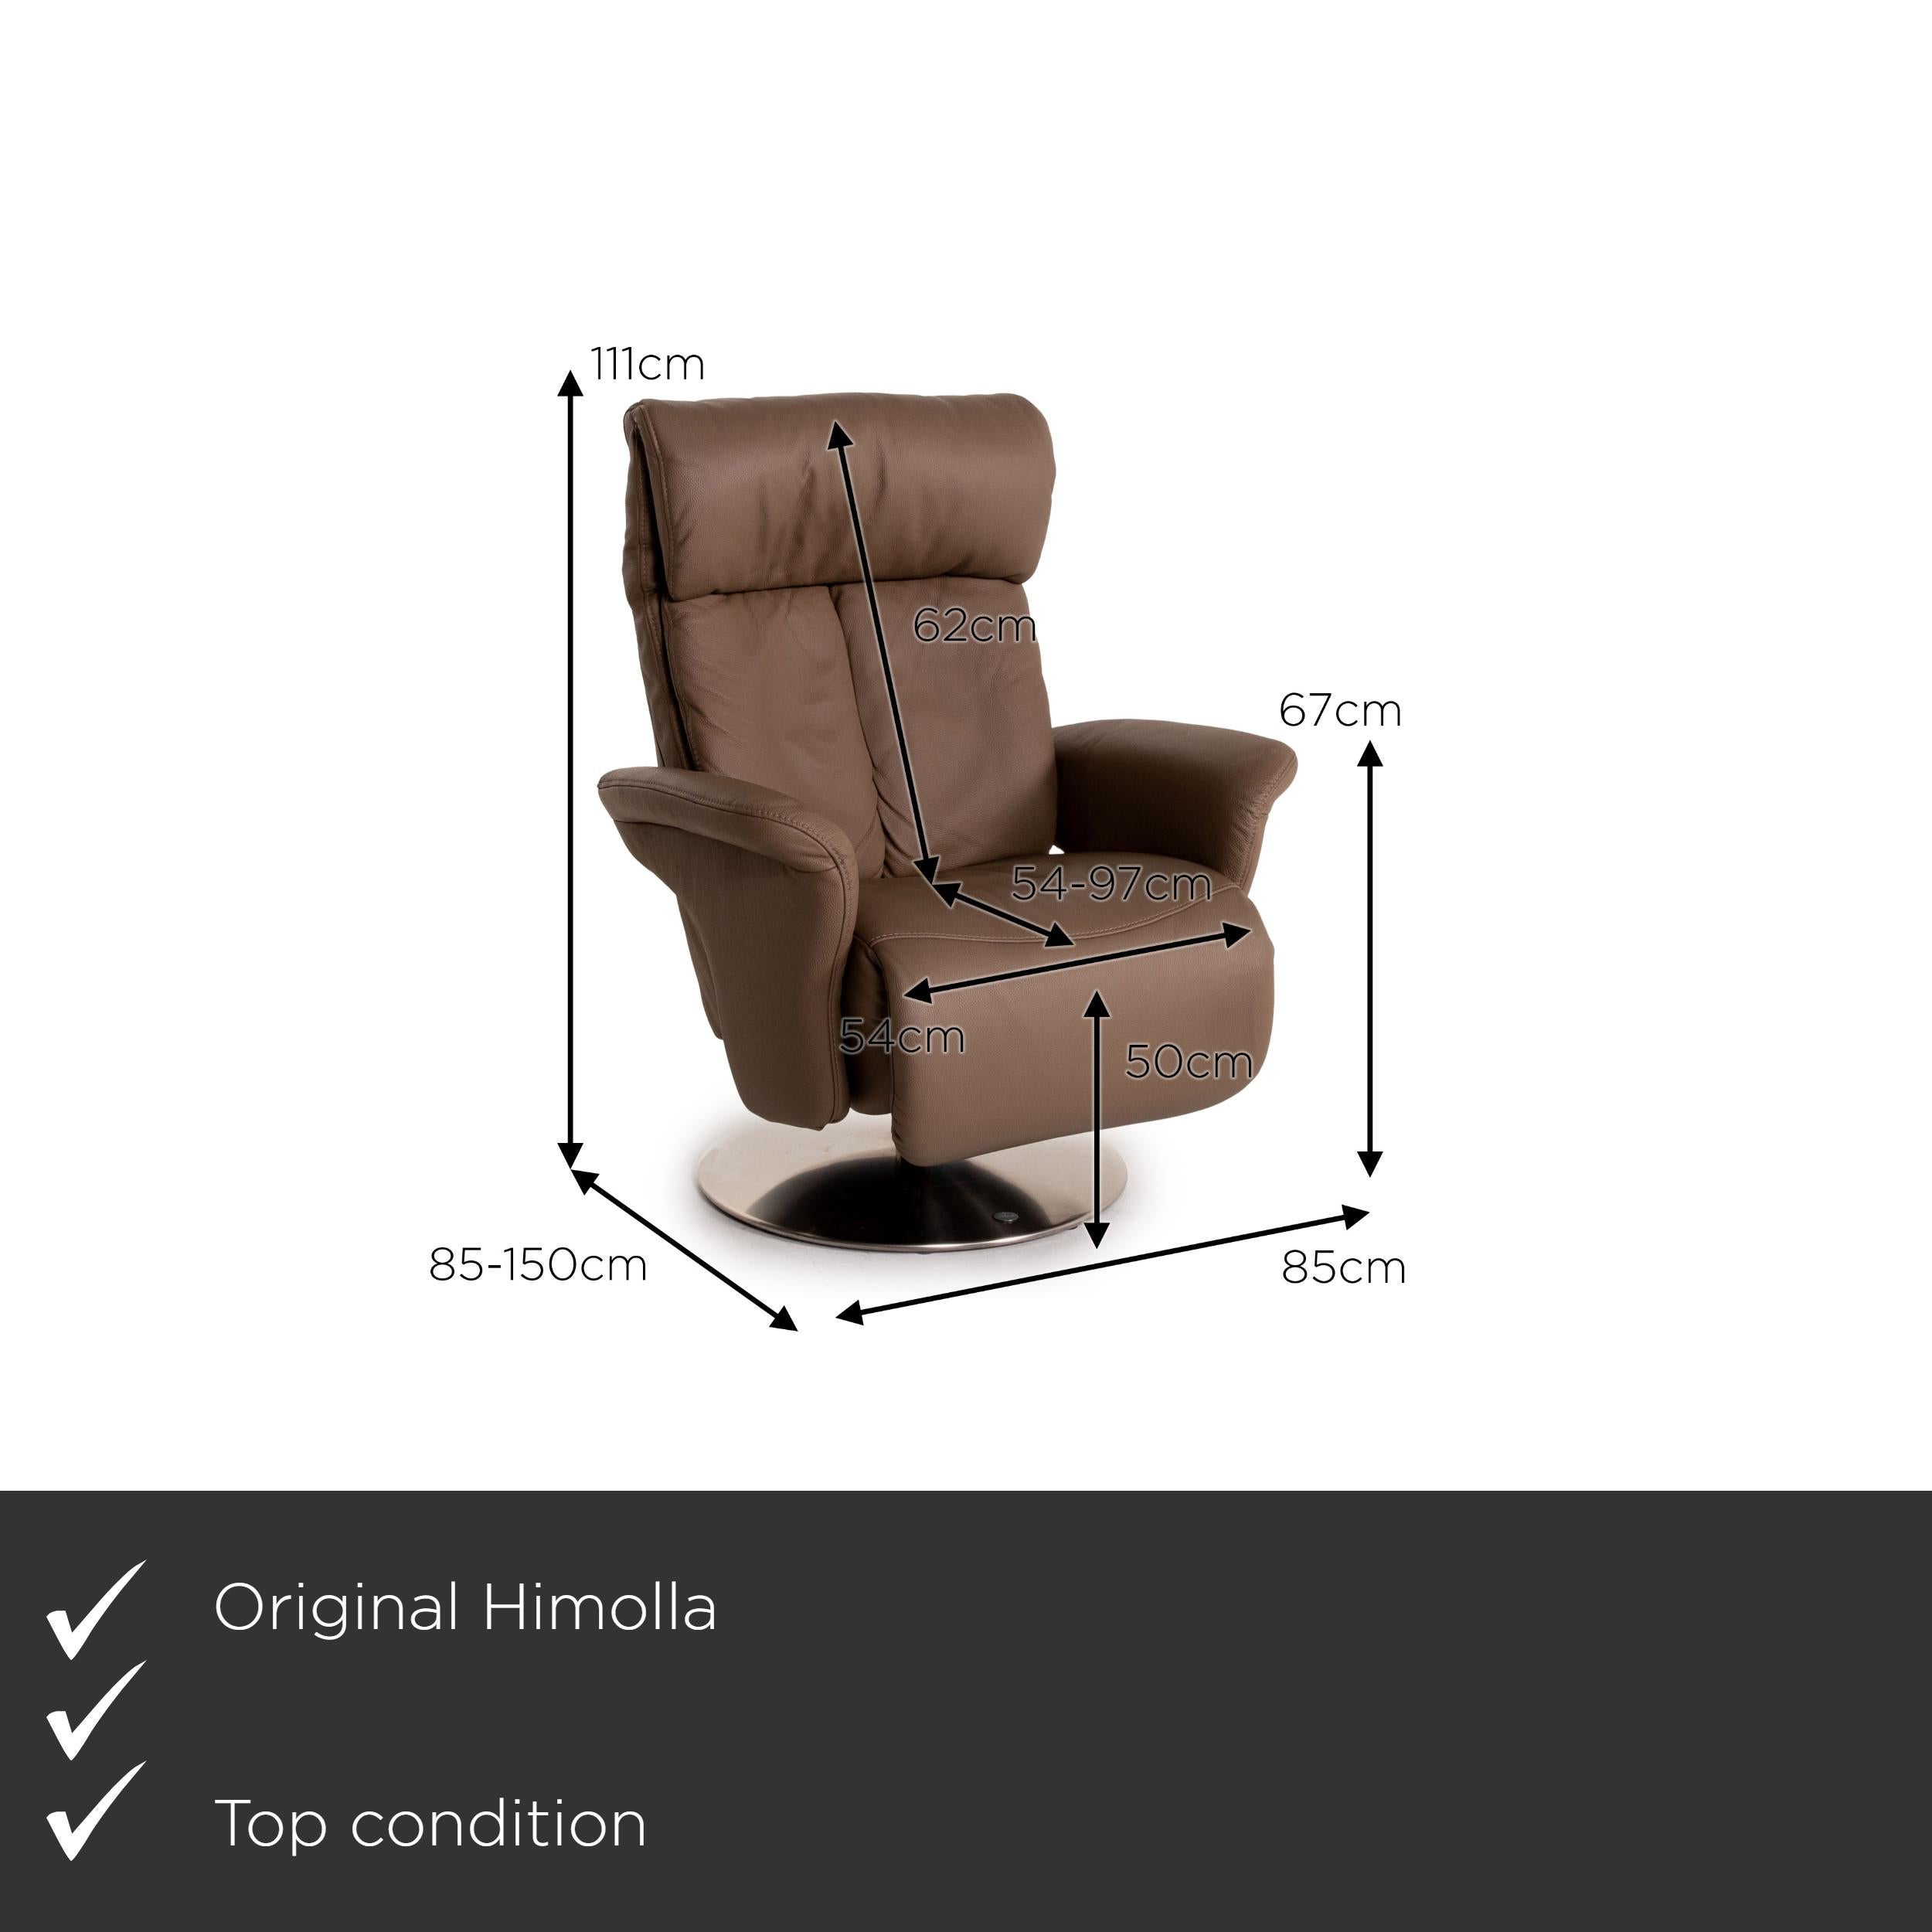 We present to you a Himolla 7227 leather armchair brown relaxation function function relaxation.
 
 

 Product measurements in centimeters:
 

Depth 85
Width 85
Height 111
Seat height 50
Rest height 67
Seat depth 54
Seat width 54
Back